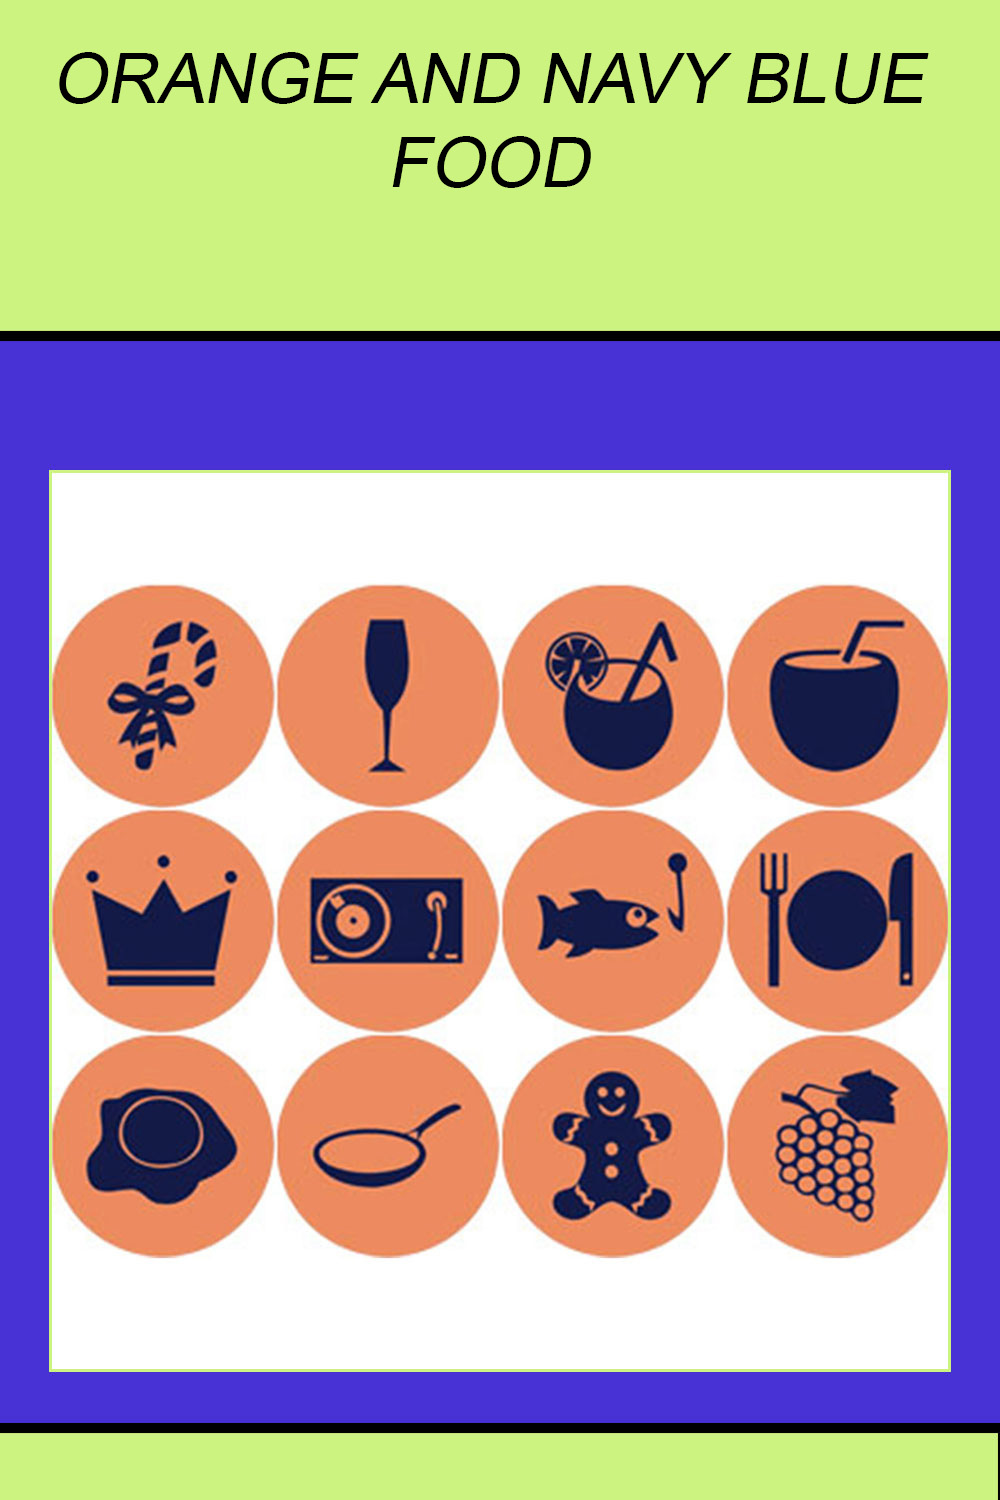 ORANGE AND NAVY BLUE FOOD ROUND ICONS pinterest preview image.